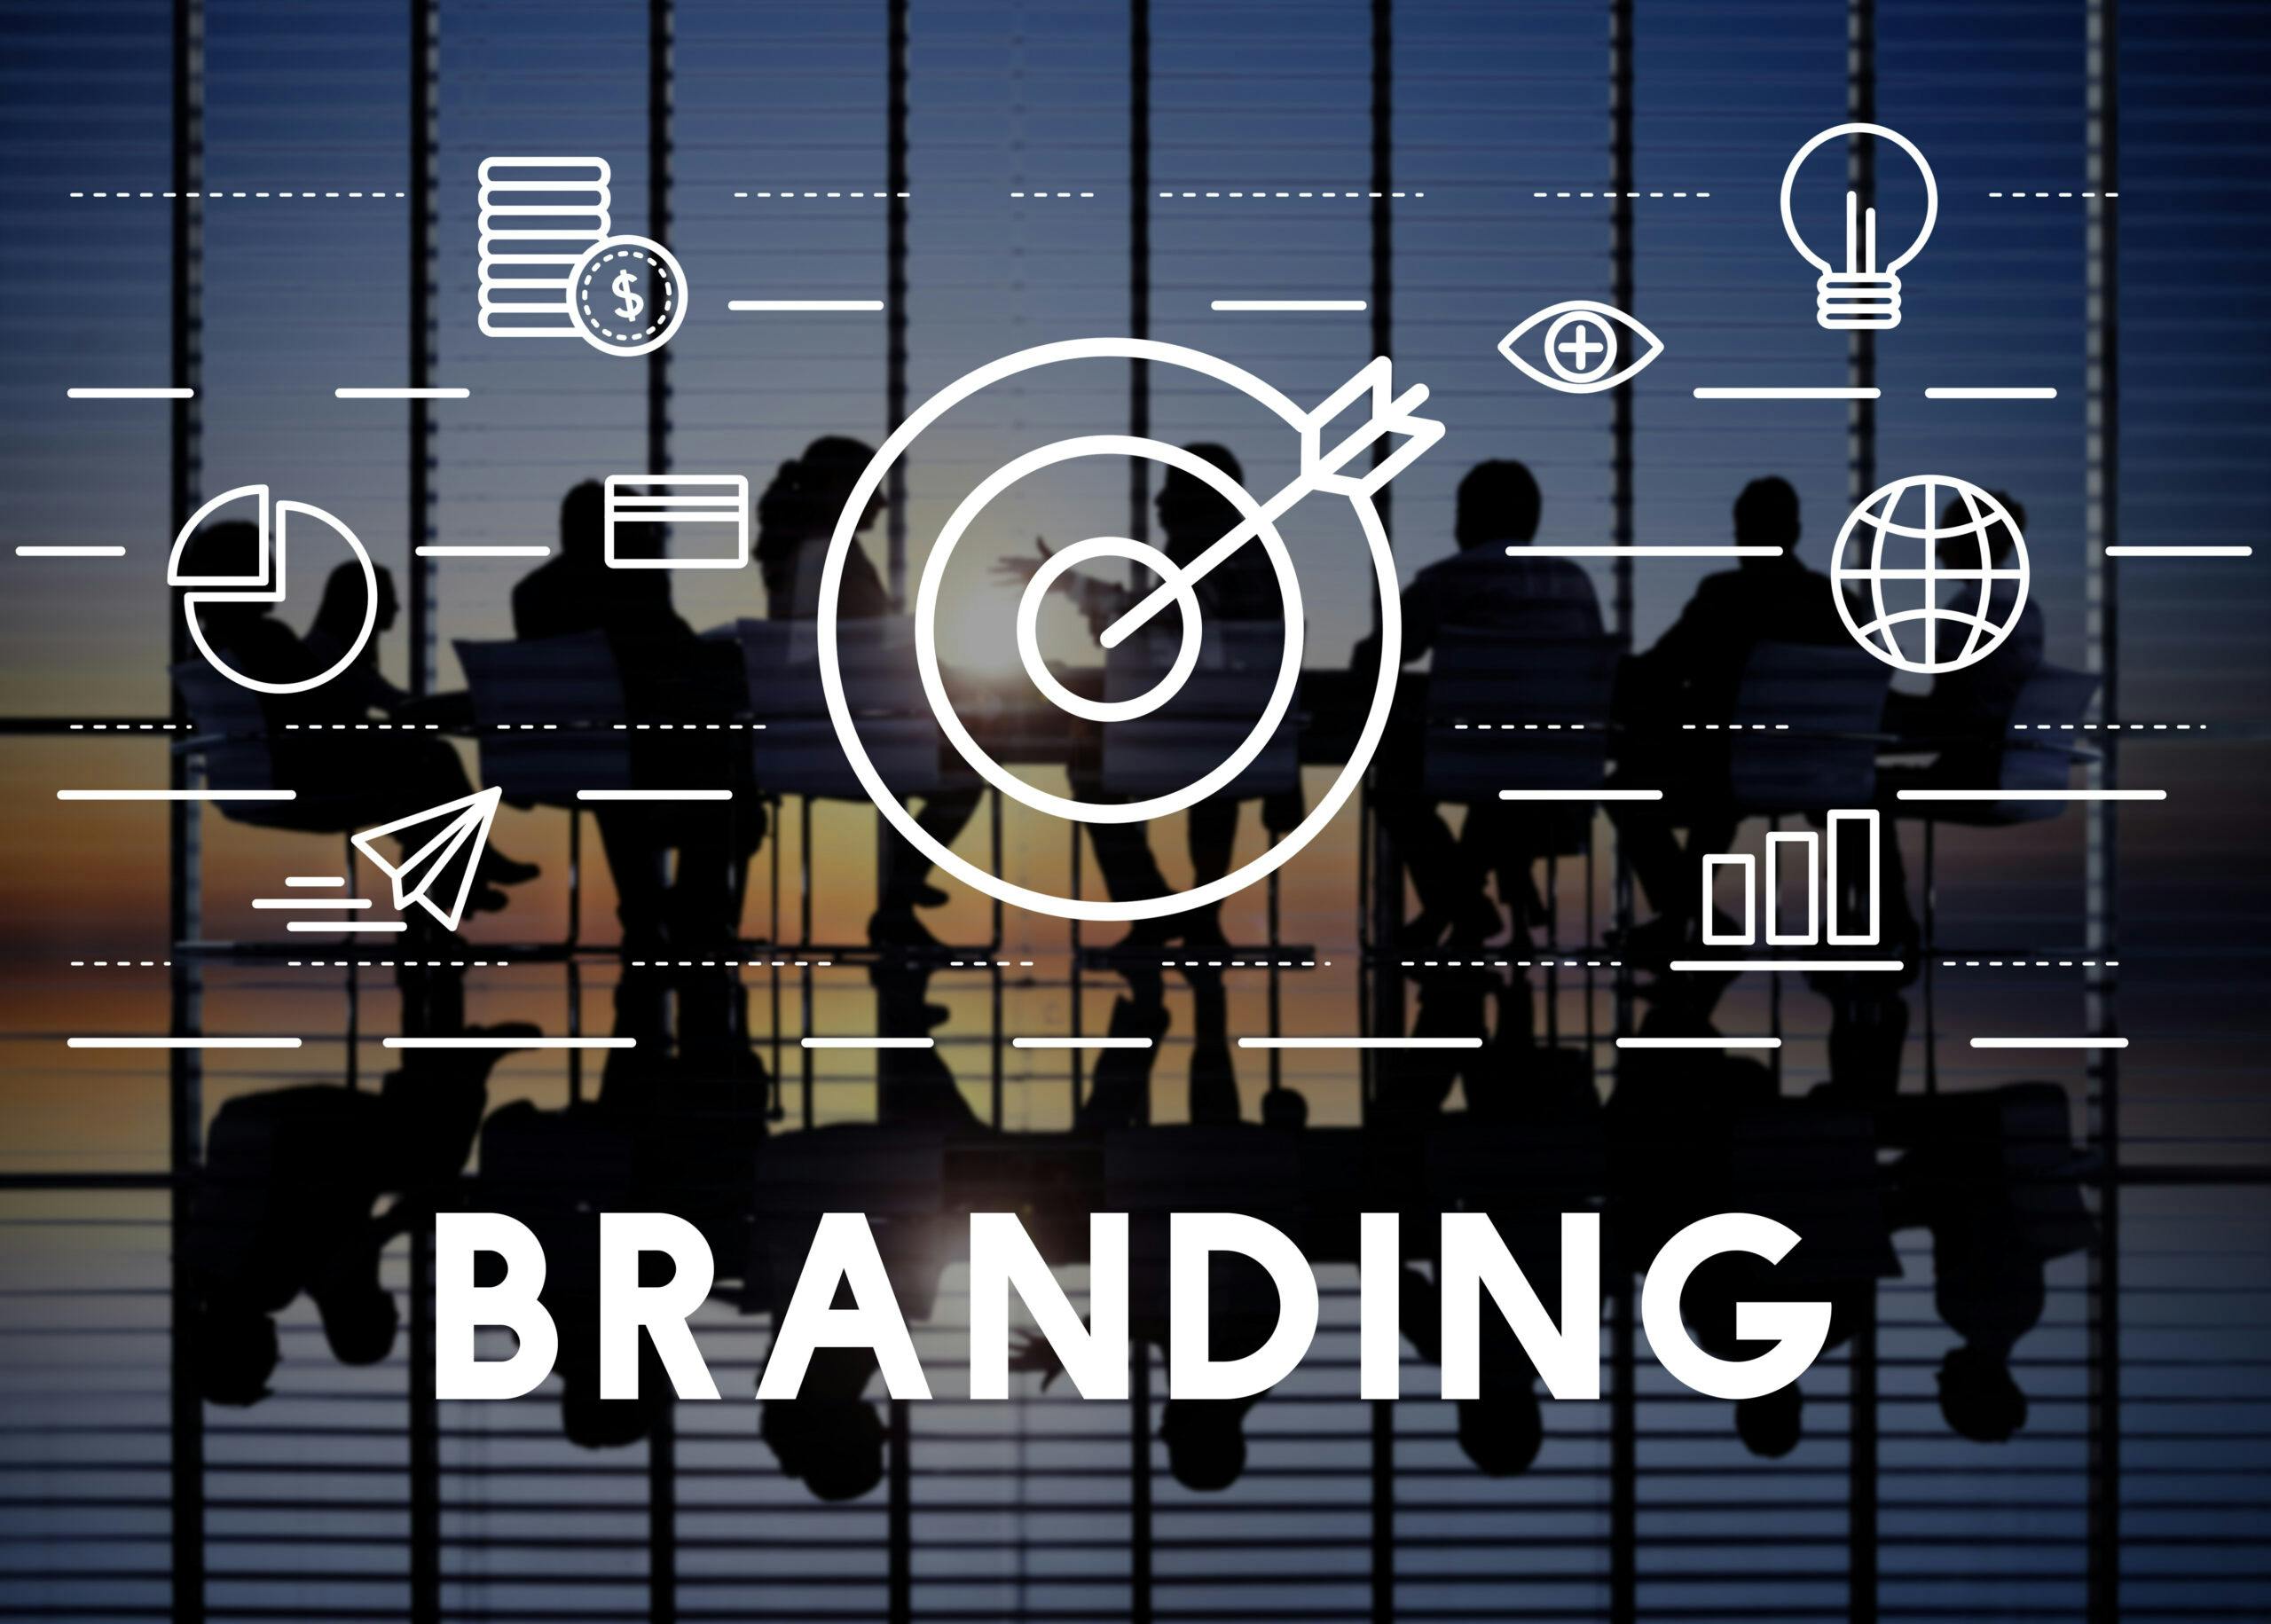 What are the Best Practices for Building a Personal Brand as an Entrepreneur?